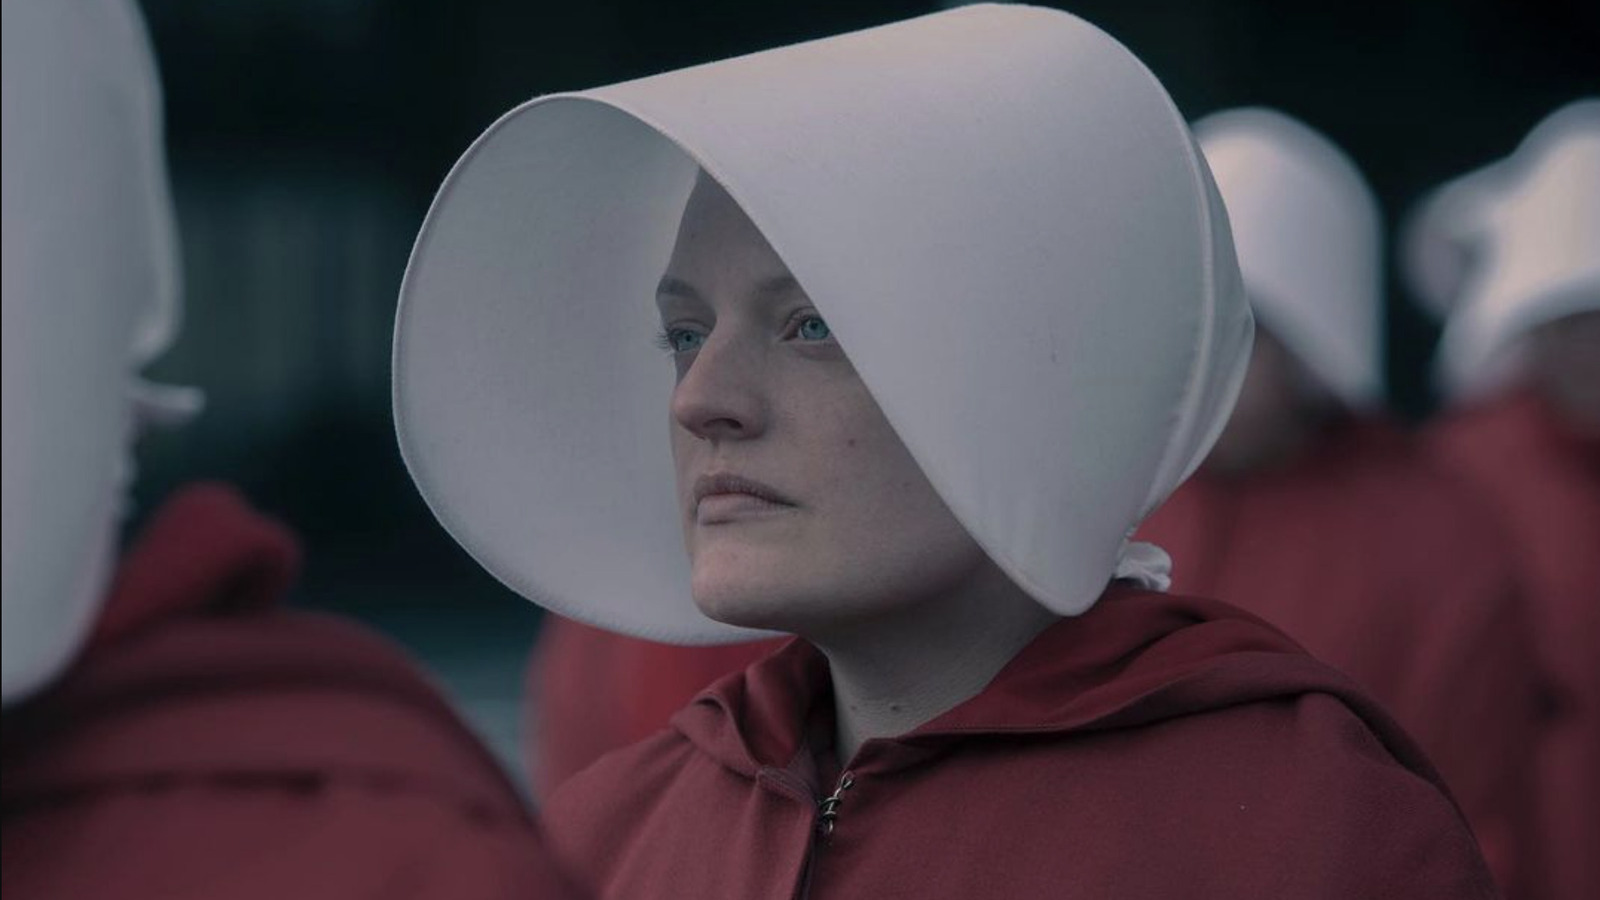 The Handmaid's Tale will return for its sixth and final season.